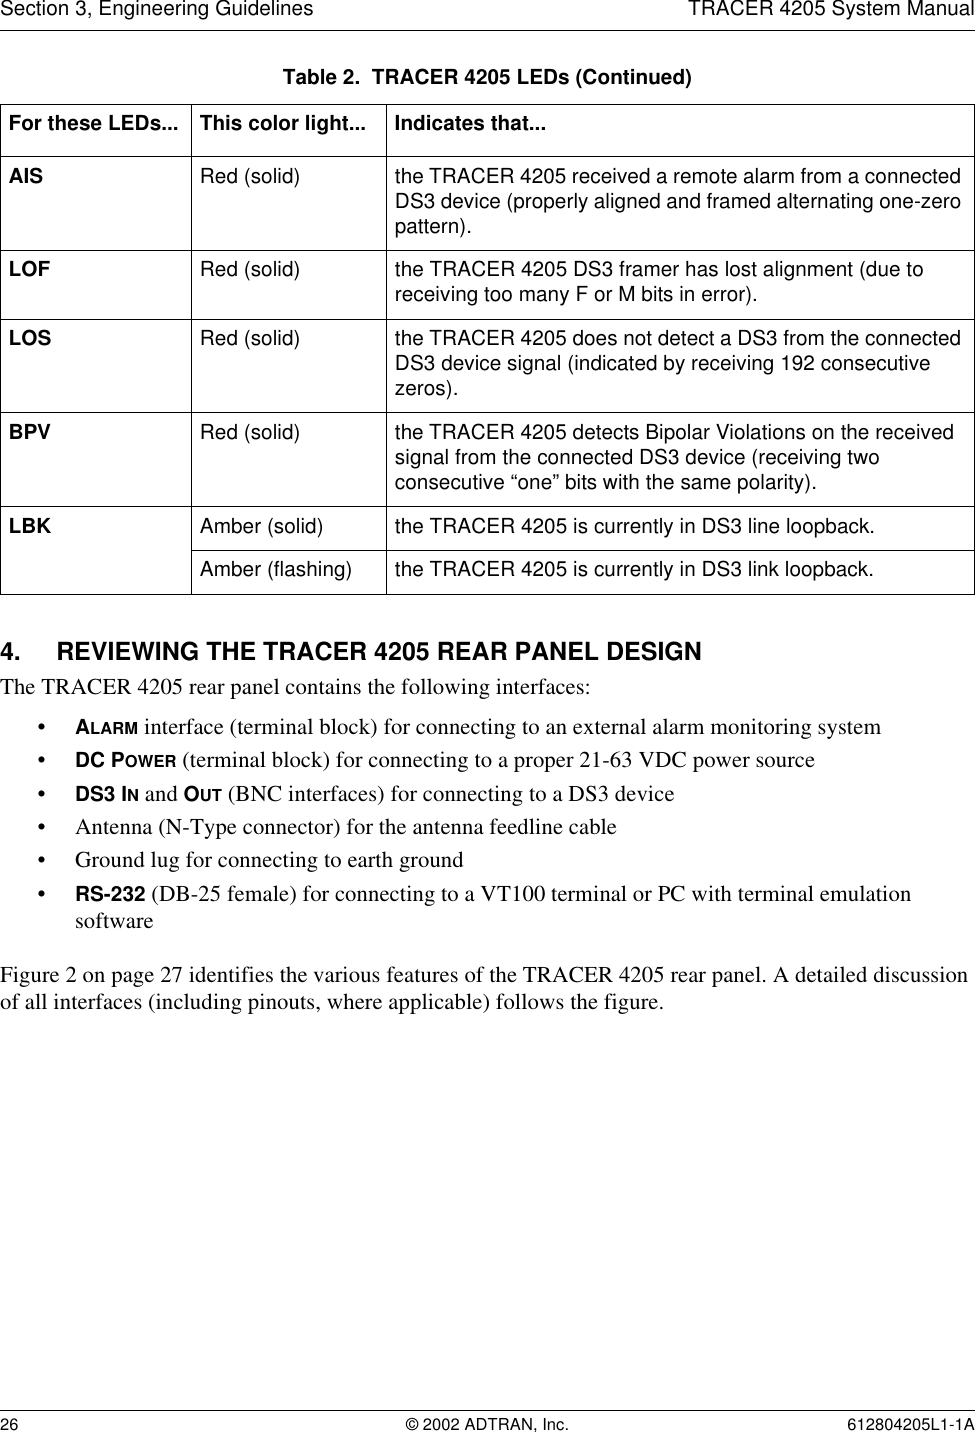 Section 3, Engineering Guidelines TRACER 4205 System Manual26 © 2002 ADTRAN, Inc. 612804205L1-1A4. REVIEWING THE TRACER 4205 REAR PANEL DESIGNThe TRACER 4205 rear panel contains the following interfaces:•ALARM interface (terminal block) for connecting to an external alarm monitoring system•DC POWER (terminal block) for connecting to a proper 21-63 VDC power source•DS3 IN and OUT (BNC interfaces) for connecting to a DS3 device• Antenna (N-Type connector) for the antenna feedline cable• Ground lug for connecting to earth ground•RS-232 (DB-25 female) for connecting to a VT100 terminal or PC with terminal emulation softwareFigure 2 on page 27 identifies the various features of the TRACER 4205 rear panel. A detailed discussion of all interfaces (including pinouts, where applicable) follows the figure.AIS Red (solid) the TRACER 4205 received a remote alarm from a connected DS3 device (properly aligned and framed alternating one-zero pattern).LOF Red (solid) the TRACER 4205 DS3 framer has lost alignment (due to receiving too many F or M bits in error).LOS Red (solid) the TRACER 4205 does not detect a DS3 from the connected DS3 device signal (indicated by receiving 192 consecutive zeros).BPV Red (solid) the TRACER 4205 detects Bipolar Violations on the received signal from the connected DS3 device (receiving two consecutive “one” bits with the same polarity).LBK Amber (solid) the TRACER 4205 is currently in DS3 line loopback.Amber (flashing) the TRACER 4205 is currently in DS3 link loopback.Table 2.  TRACER 4205 LEDs (Continued)For these LEDs... This color light... Indicates that...